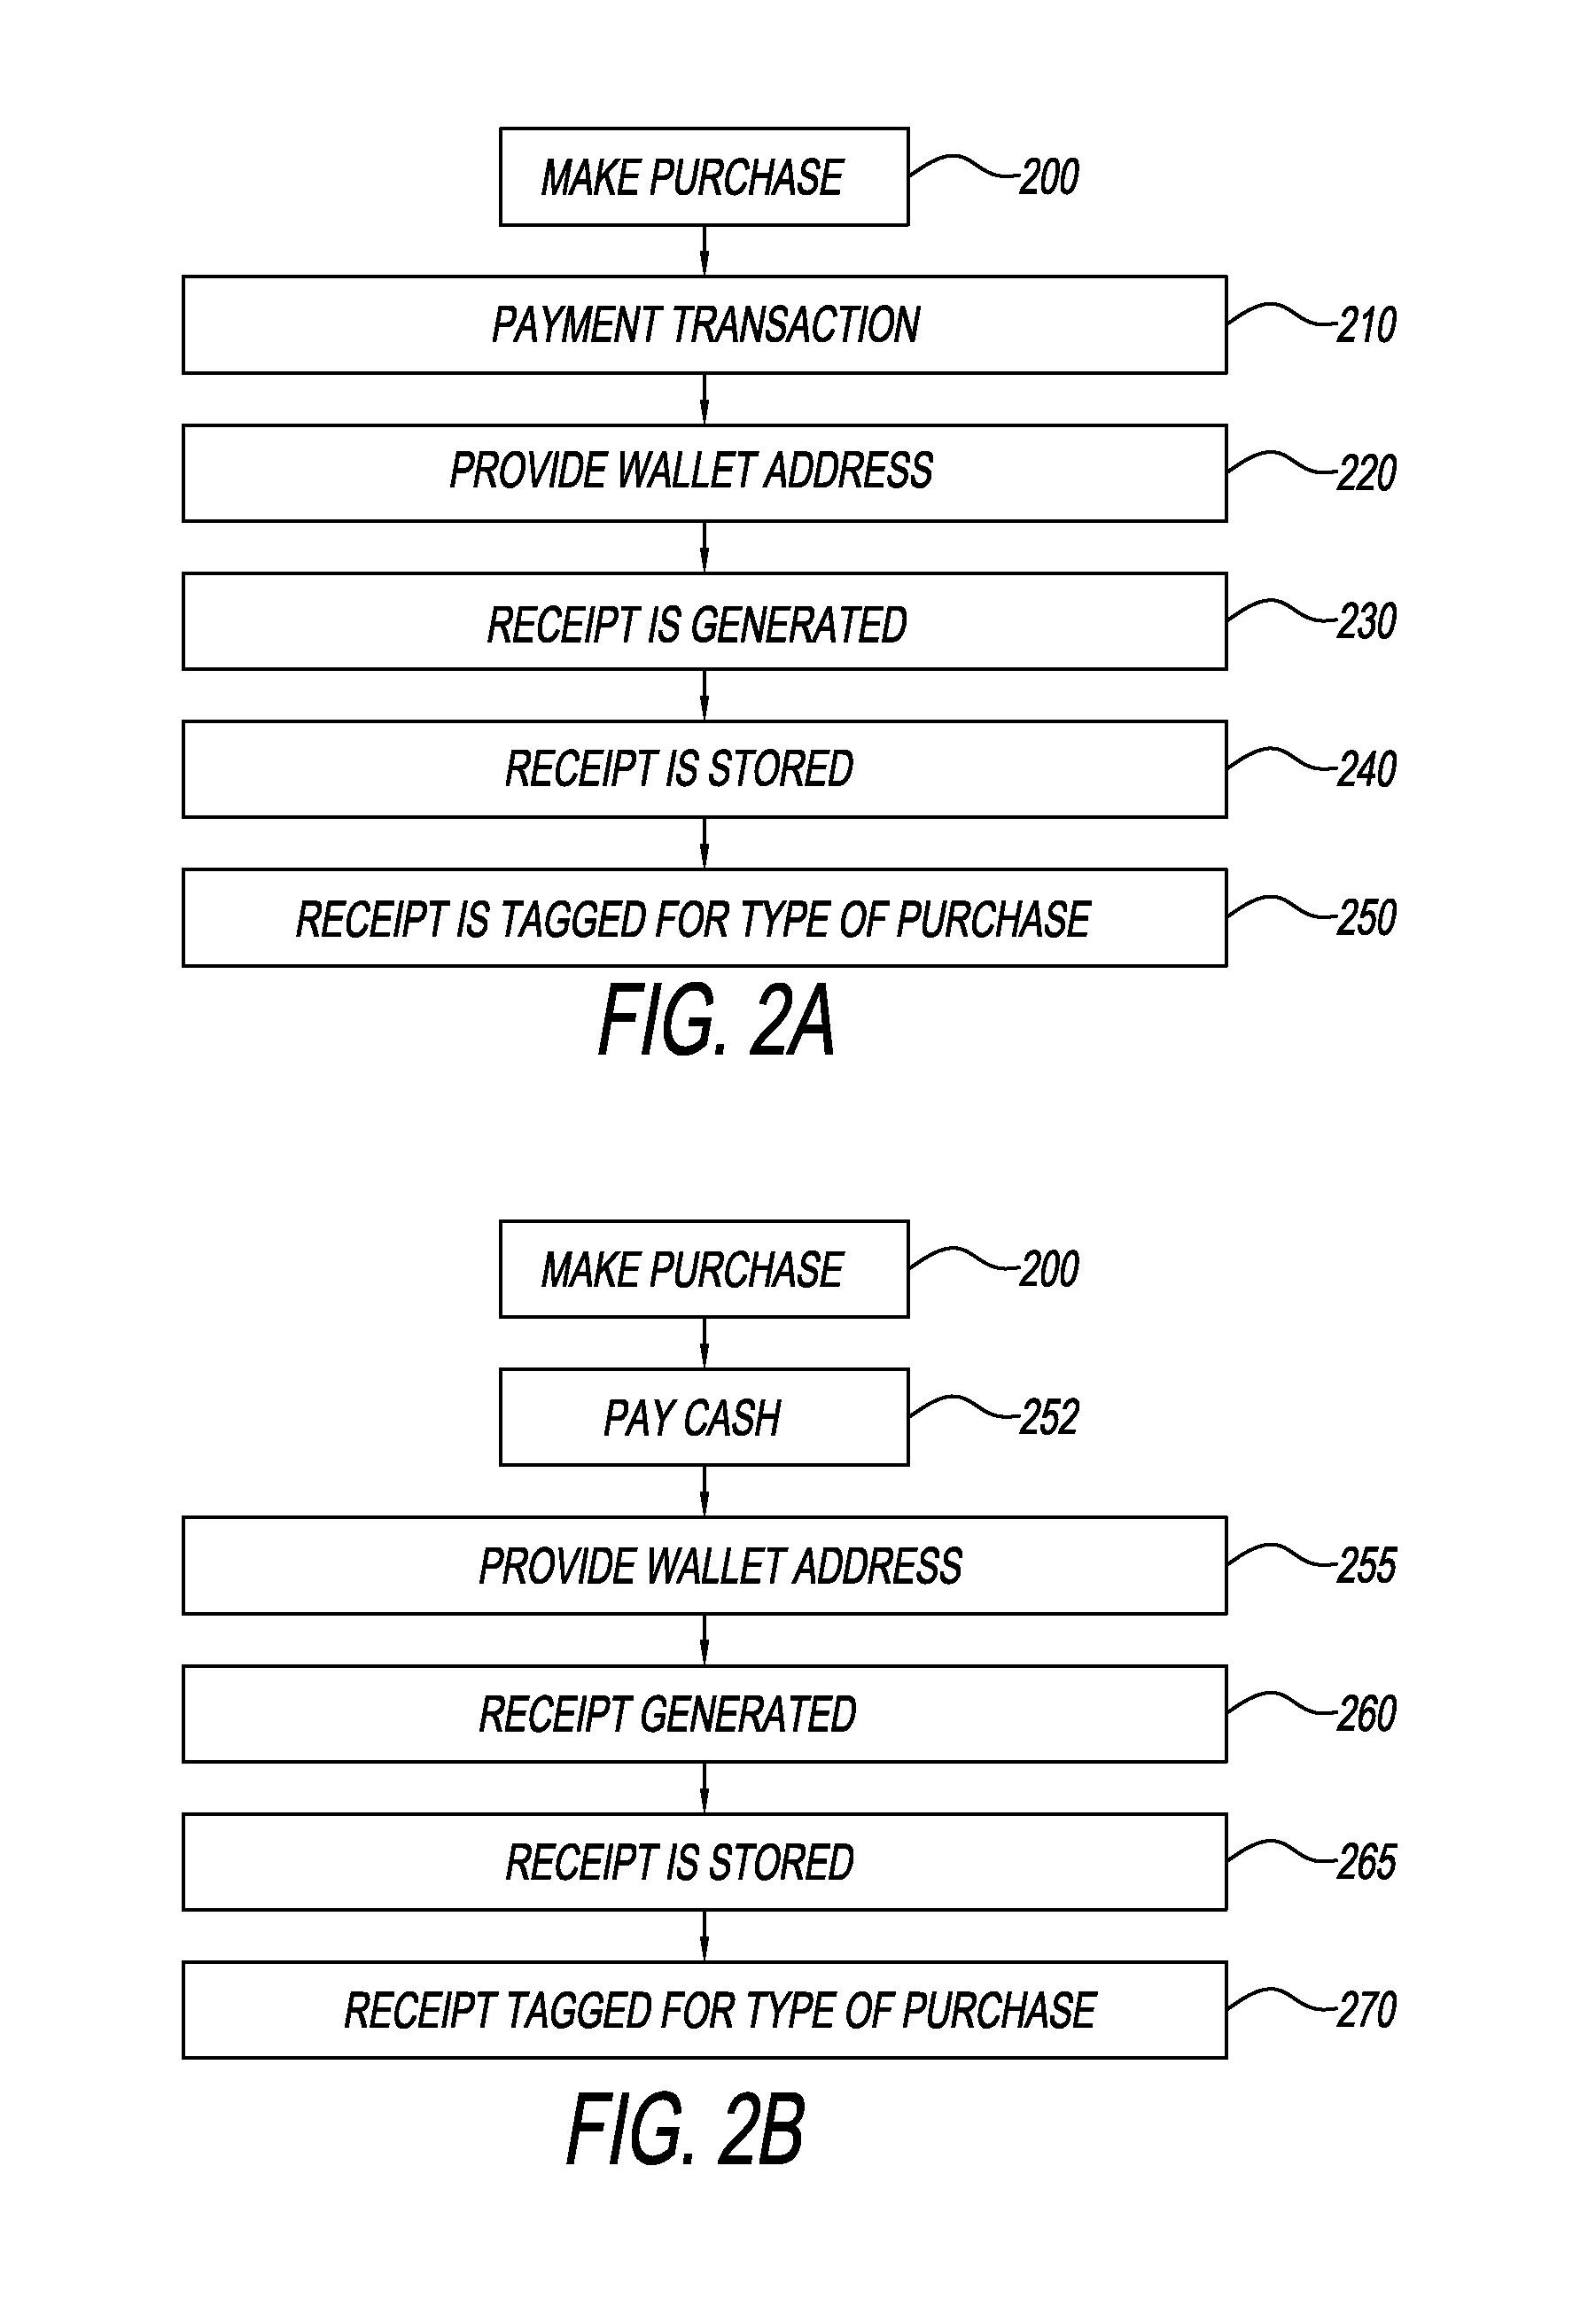 System and Method for Generating and Storing Digital Receipts for Electronic Shopping